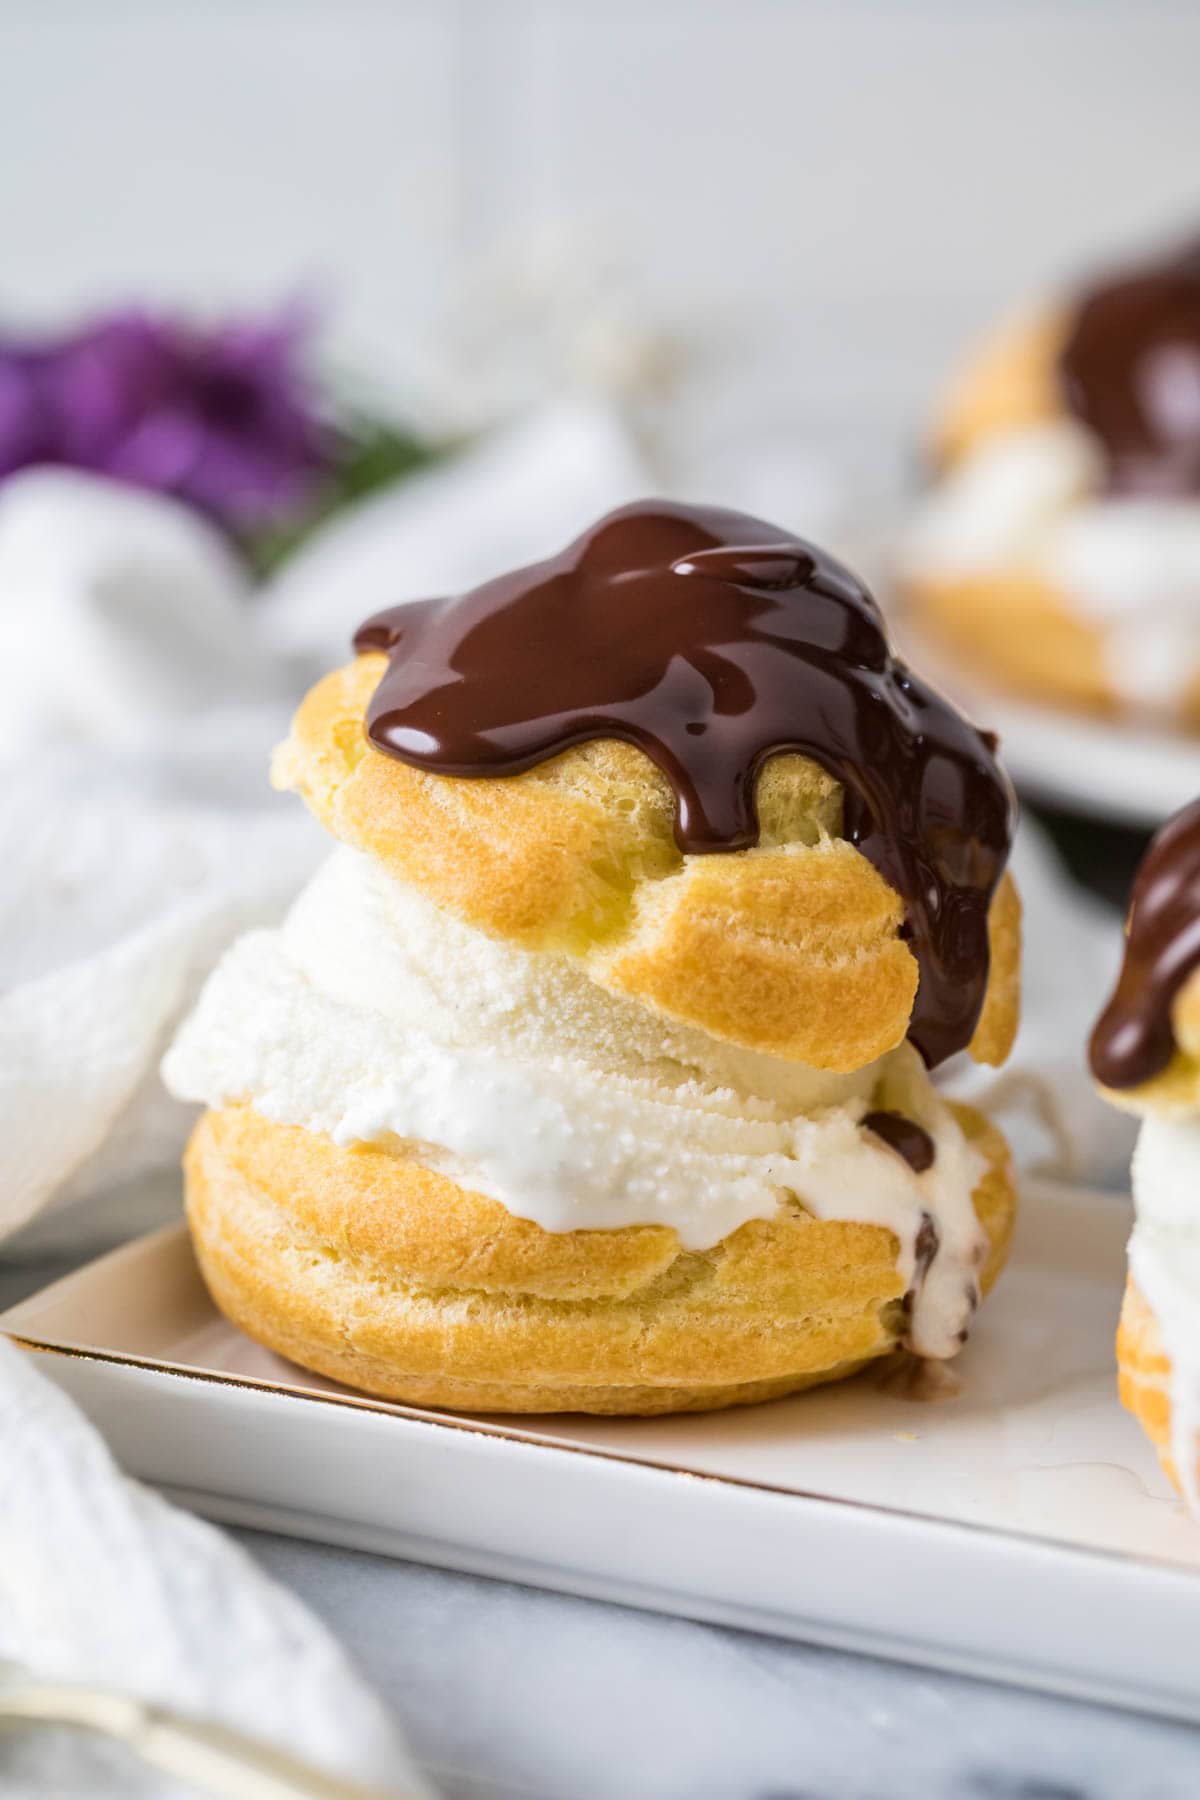 Choux bun filled with ice cream and topped with chocolate ganache.